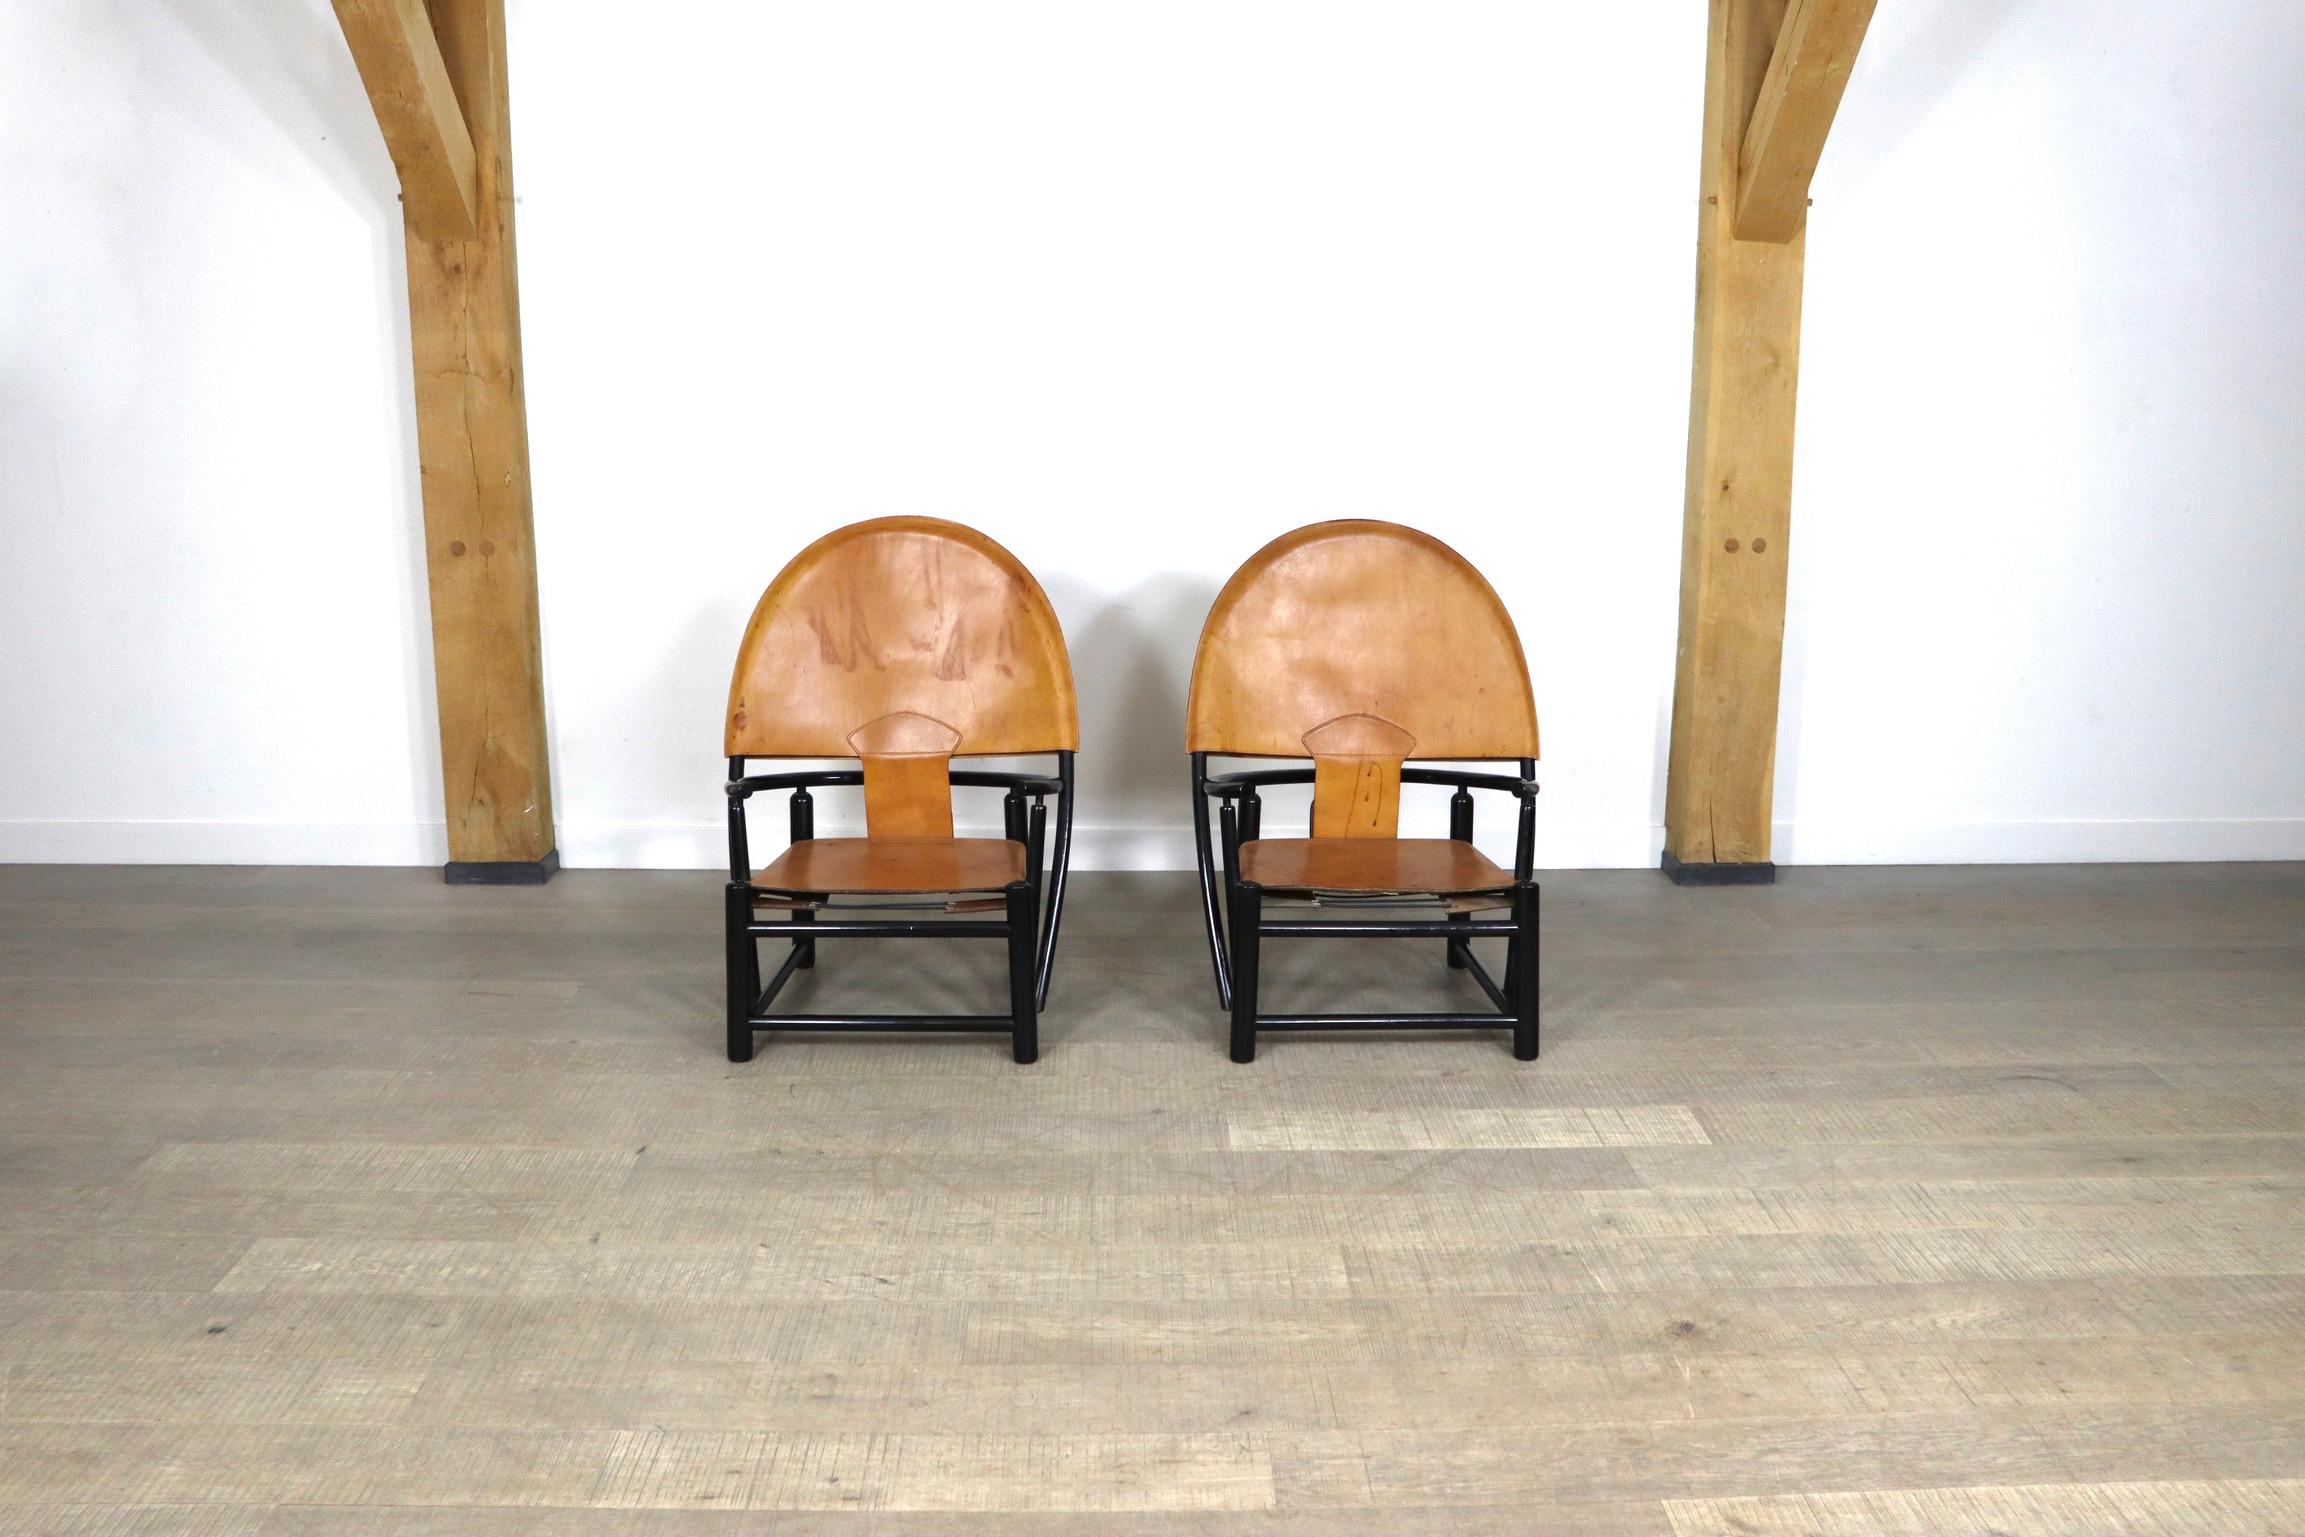 alange & Werther Toffoloni in beautifully patinated cognac leather and black lacquered wooden frame. This beautiful chairs were produced by Germa in 1972 and became known as the 'Hoop' chair.
This high quality chairs, with steam bent beech frame,